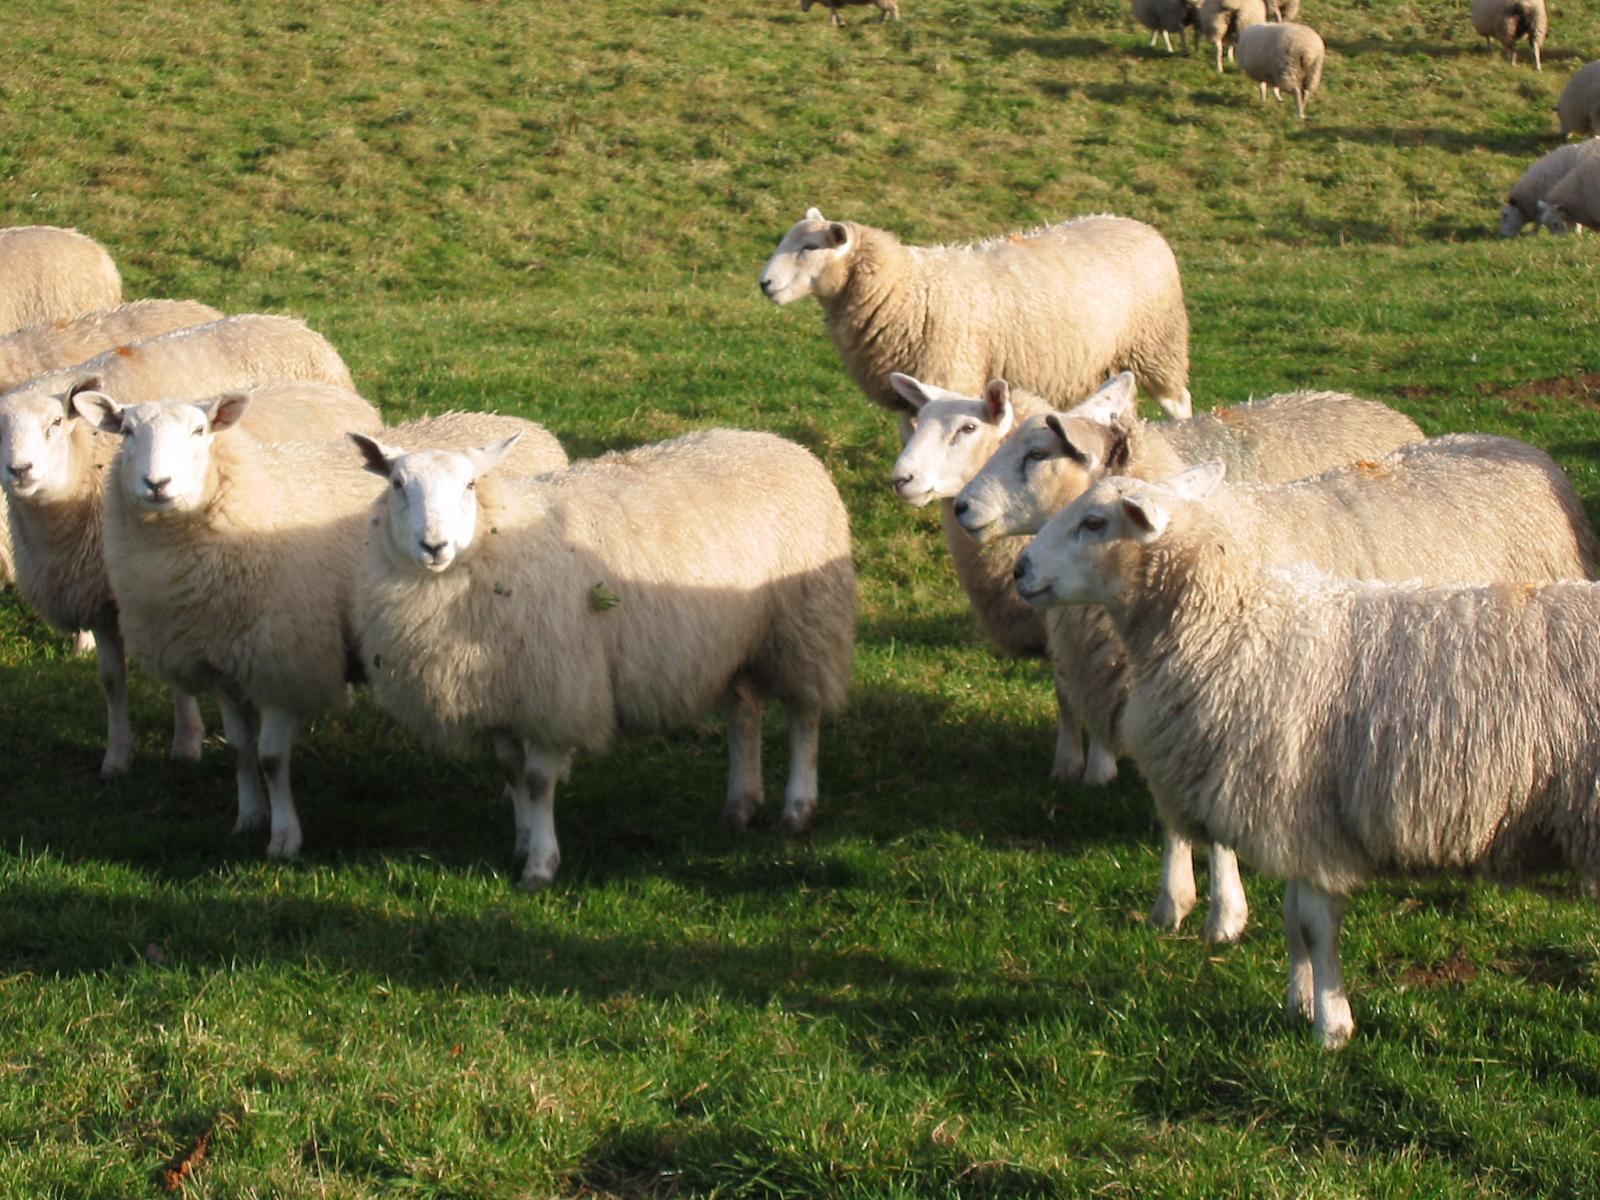 many sheep are standing together in the grass